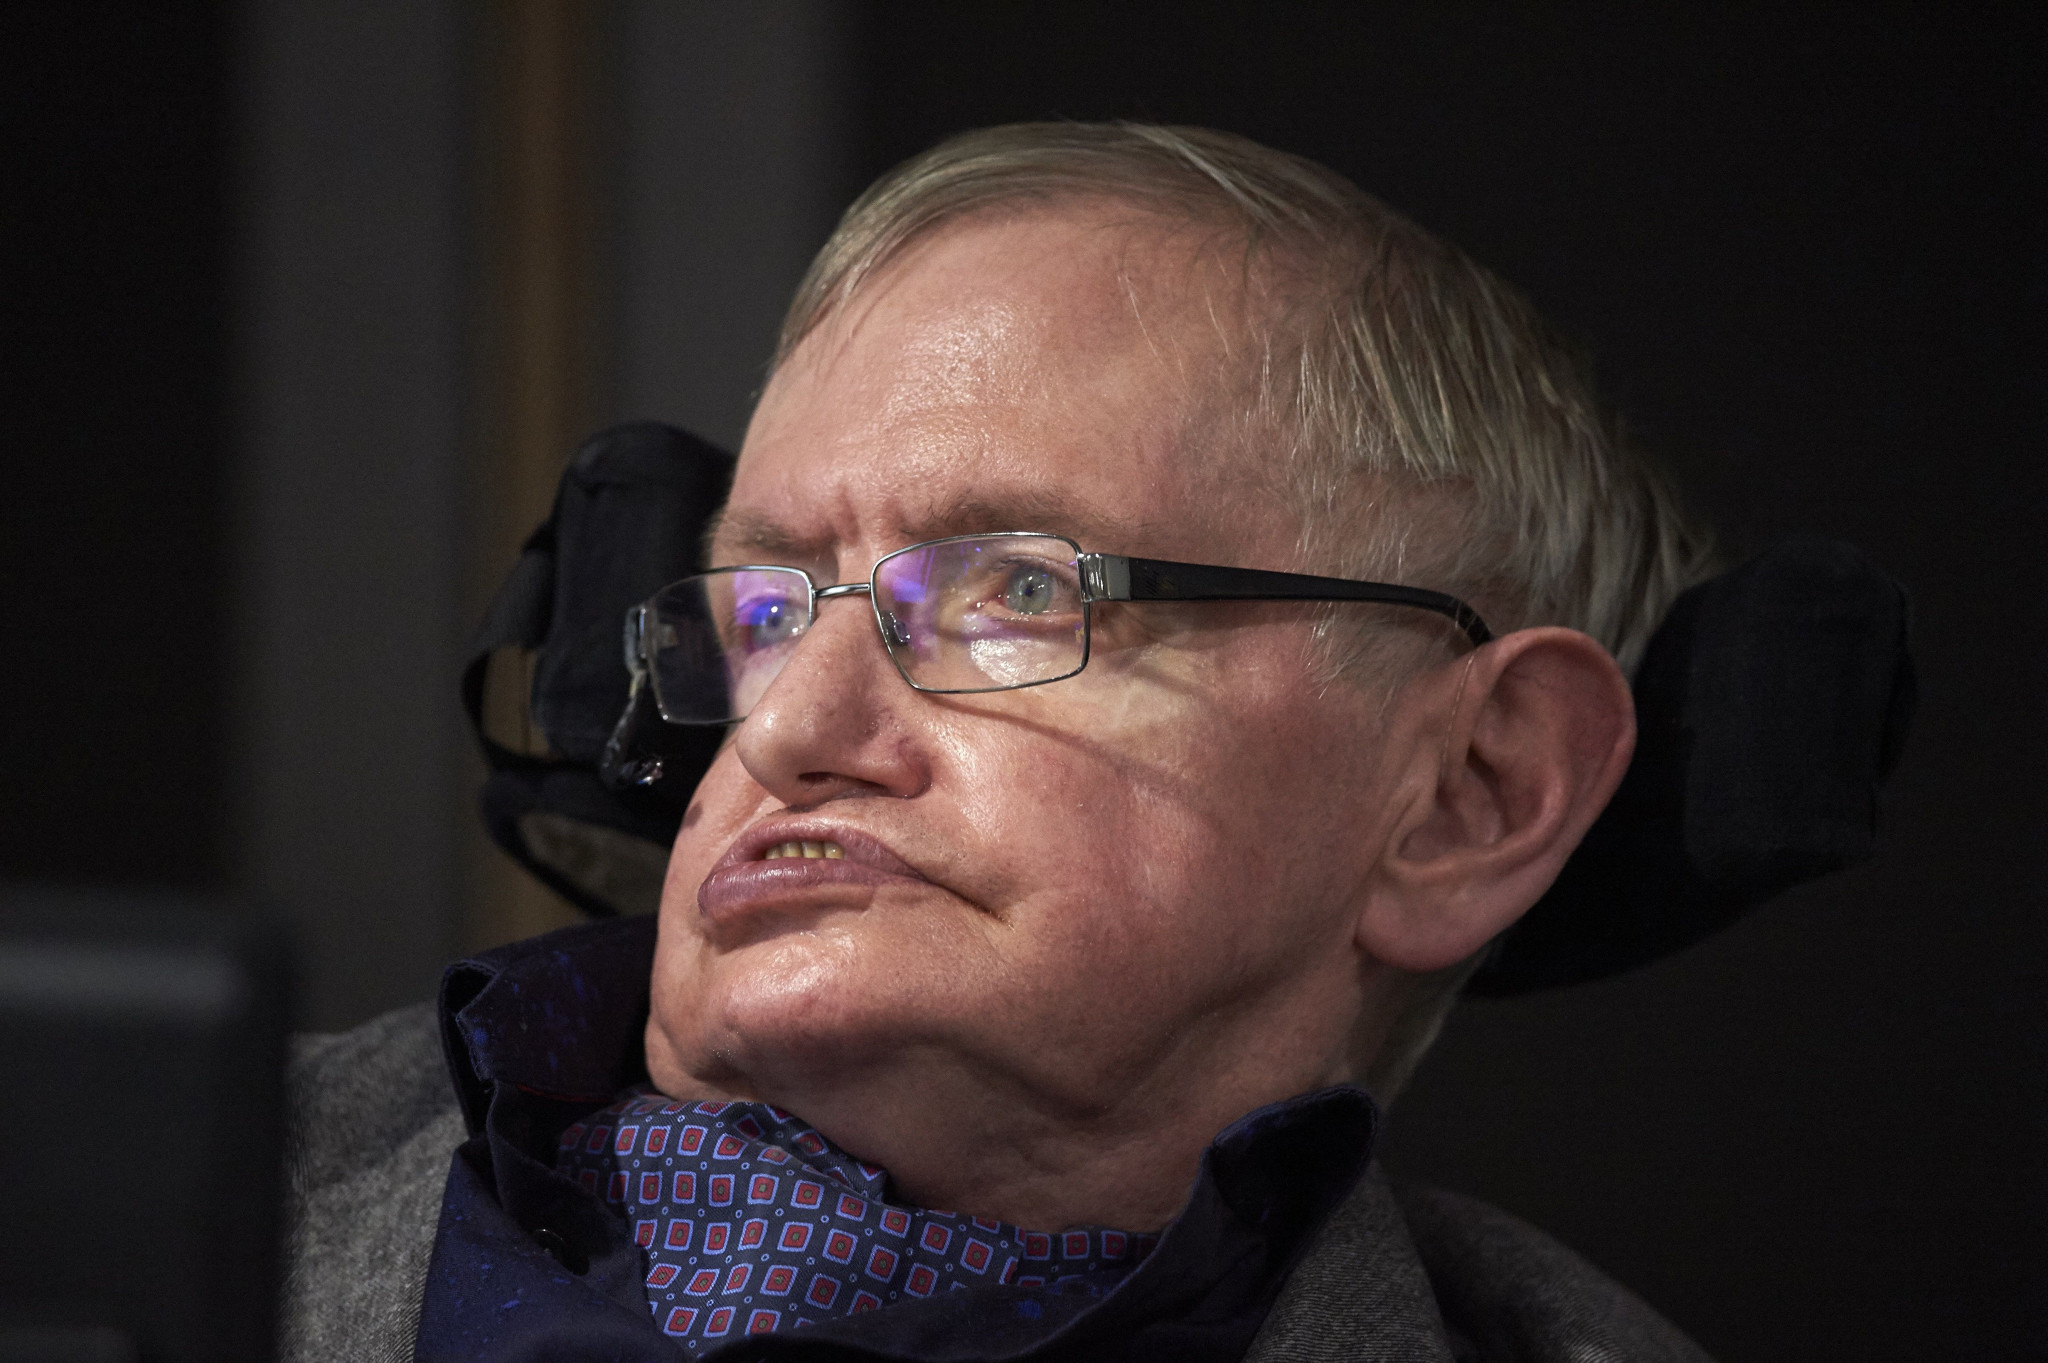 IPC President pays tribute to Stephen Hawking following death of renowned British physicist 